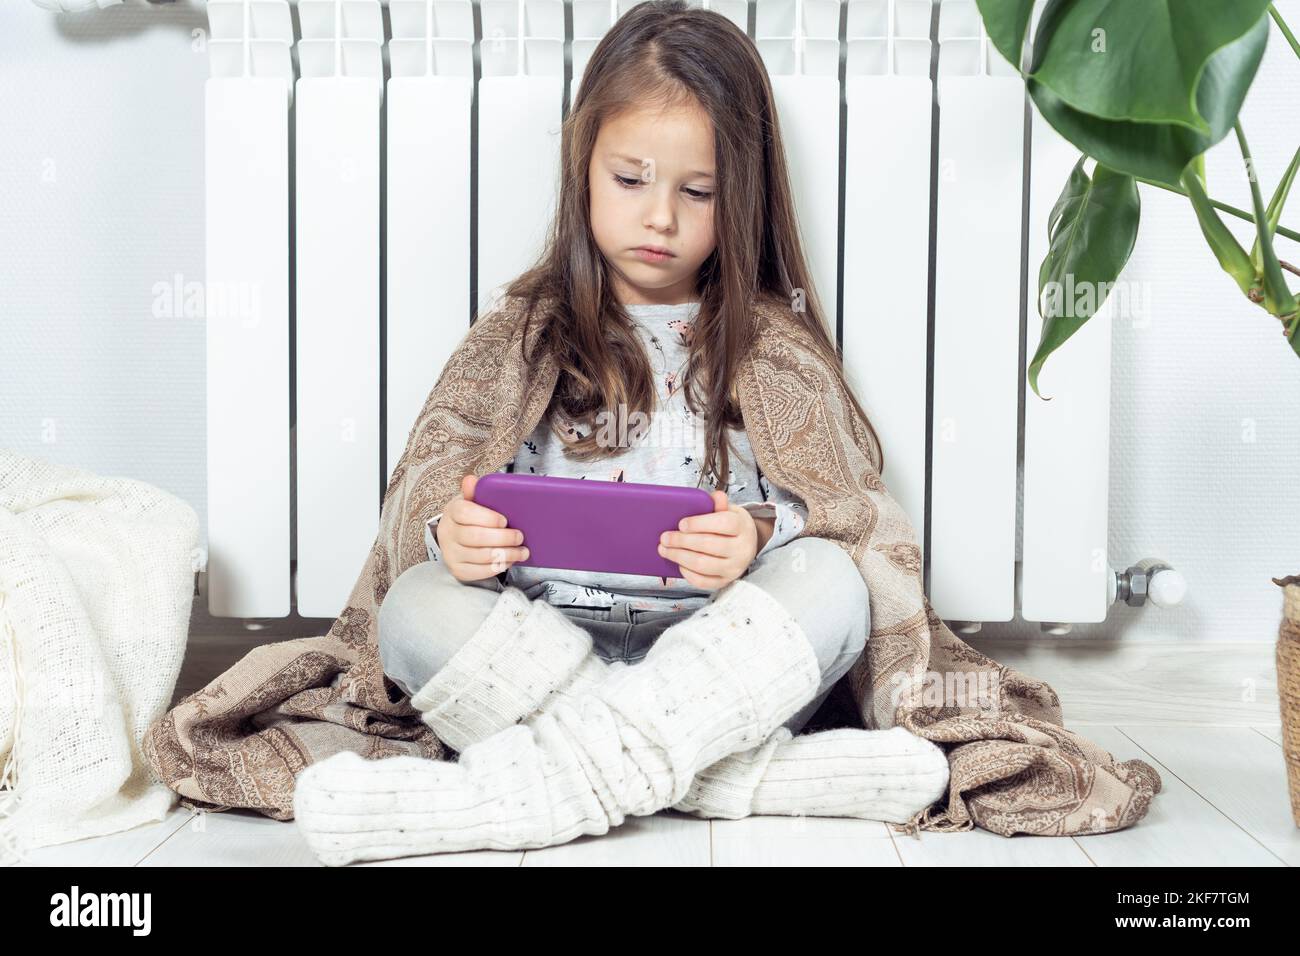 Small little brunette long haired girl using electronic tablet, surfing net and study online, wrapped in blanket, sitting near warm heating radiator Stock Photo